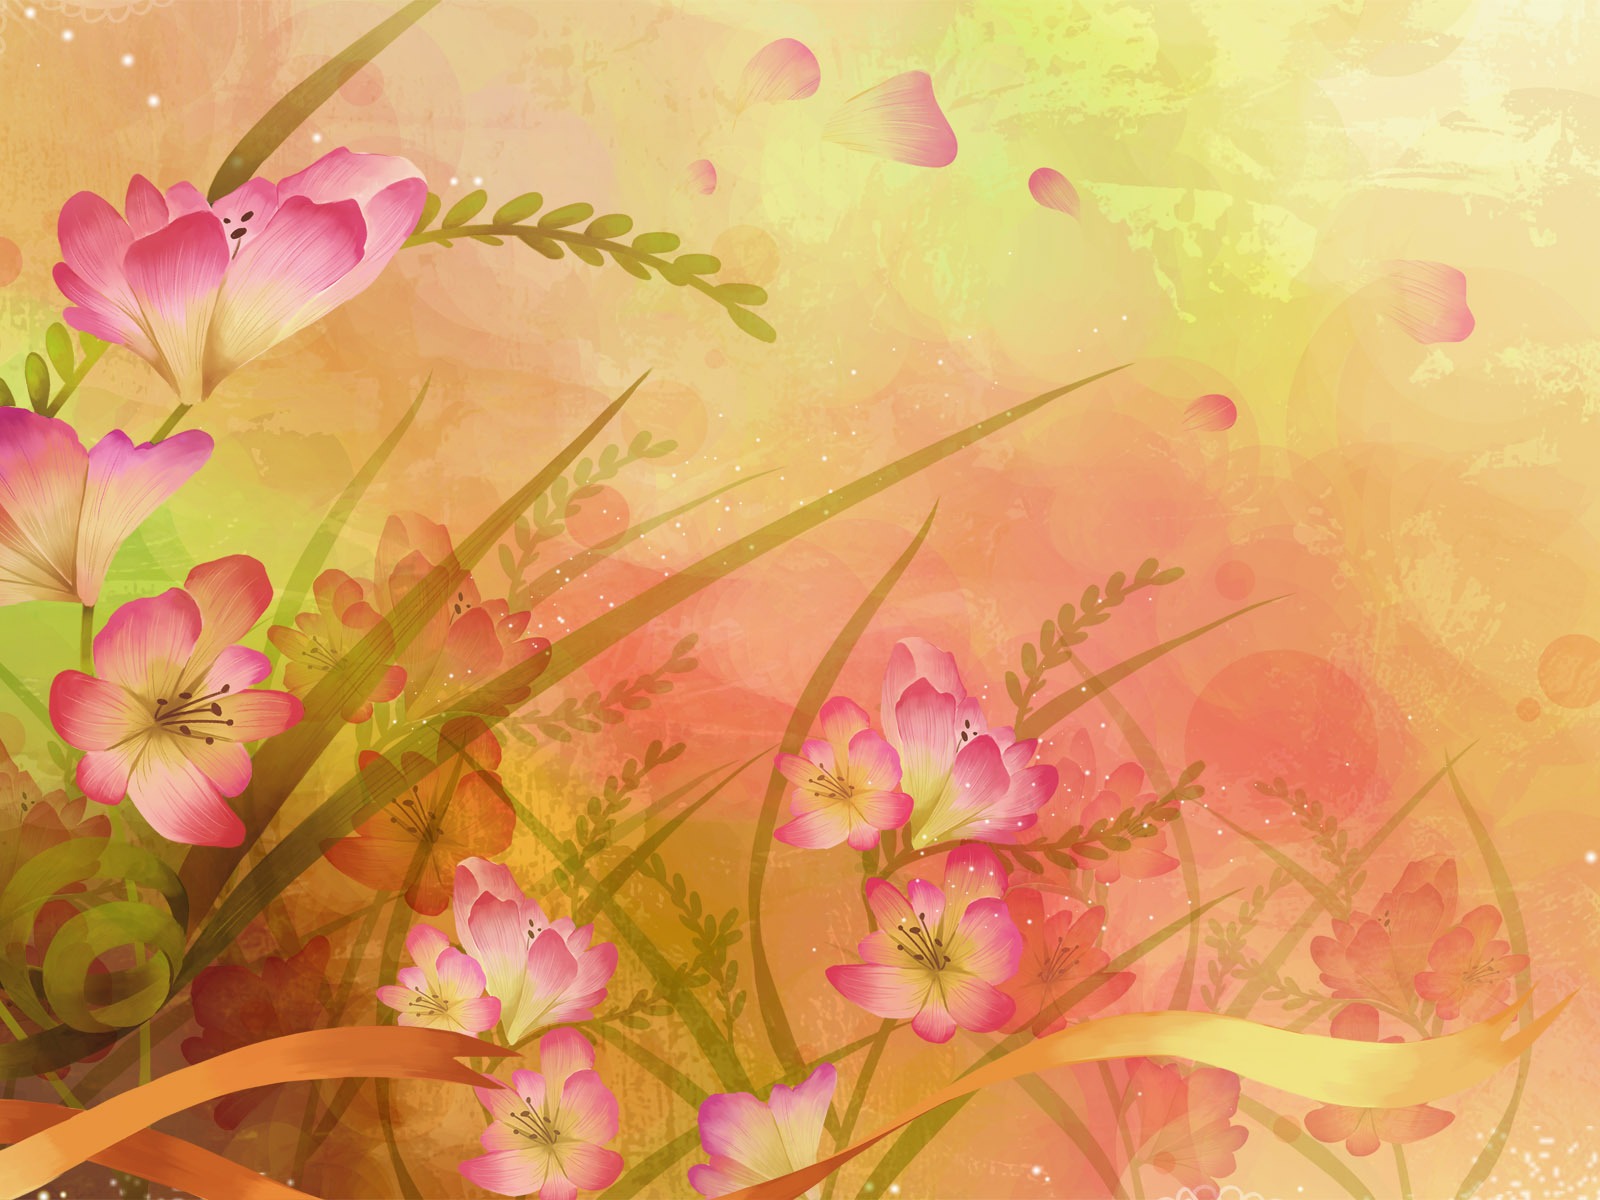 Synthetic Wallpaper Colorful Flower #40 - 1600x1200